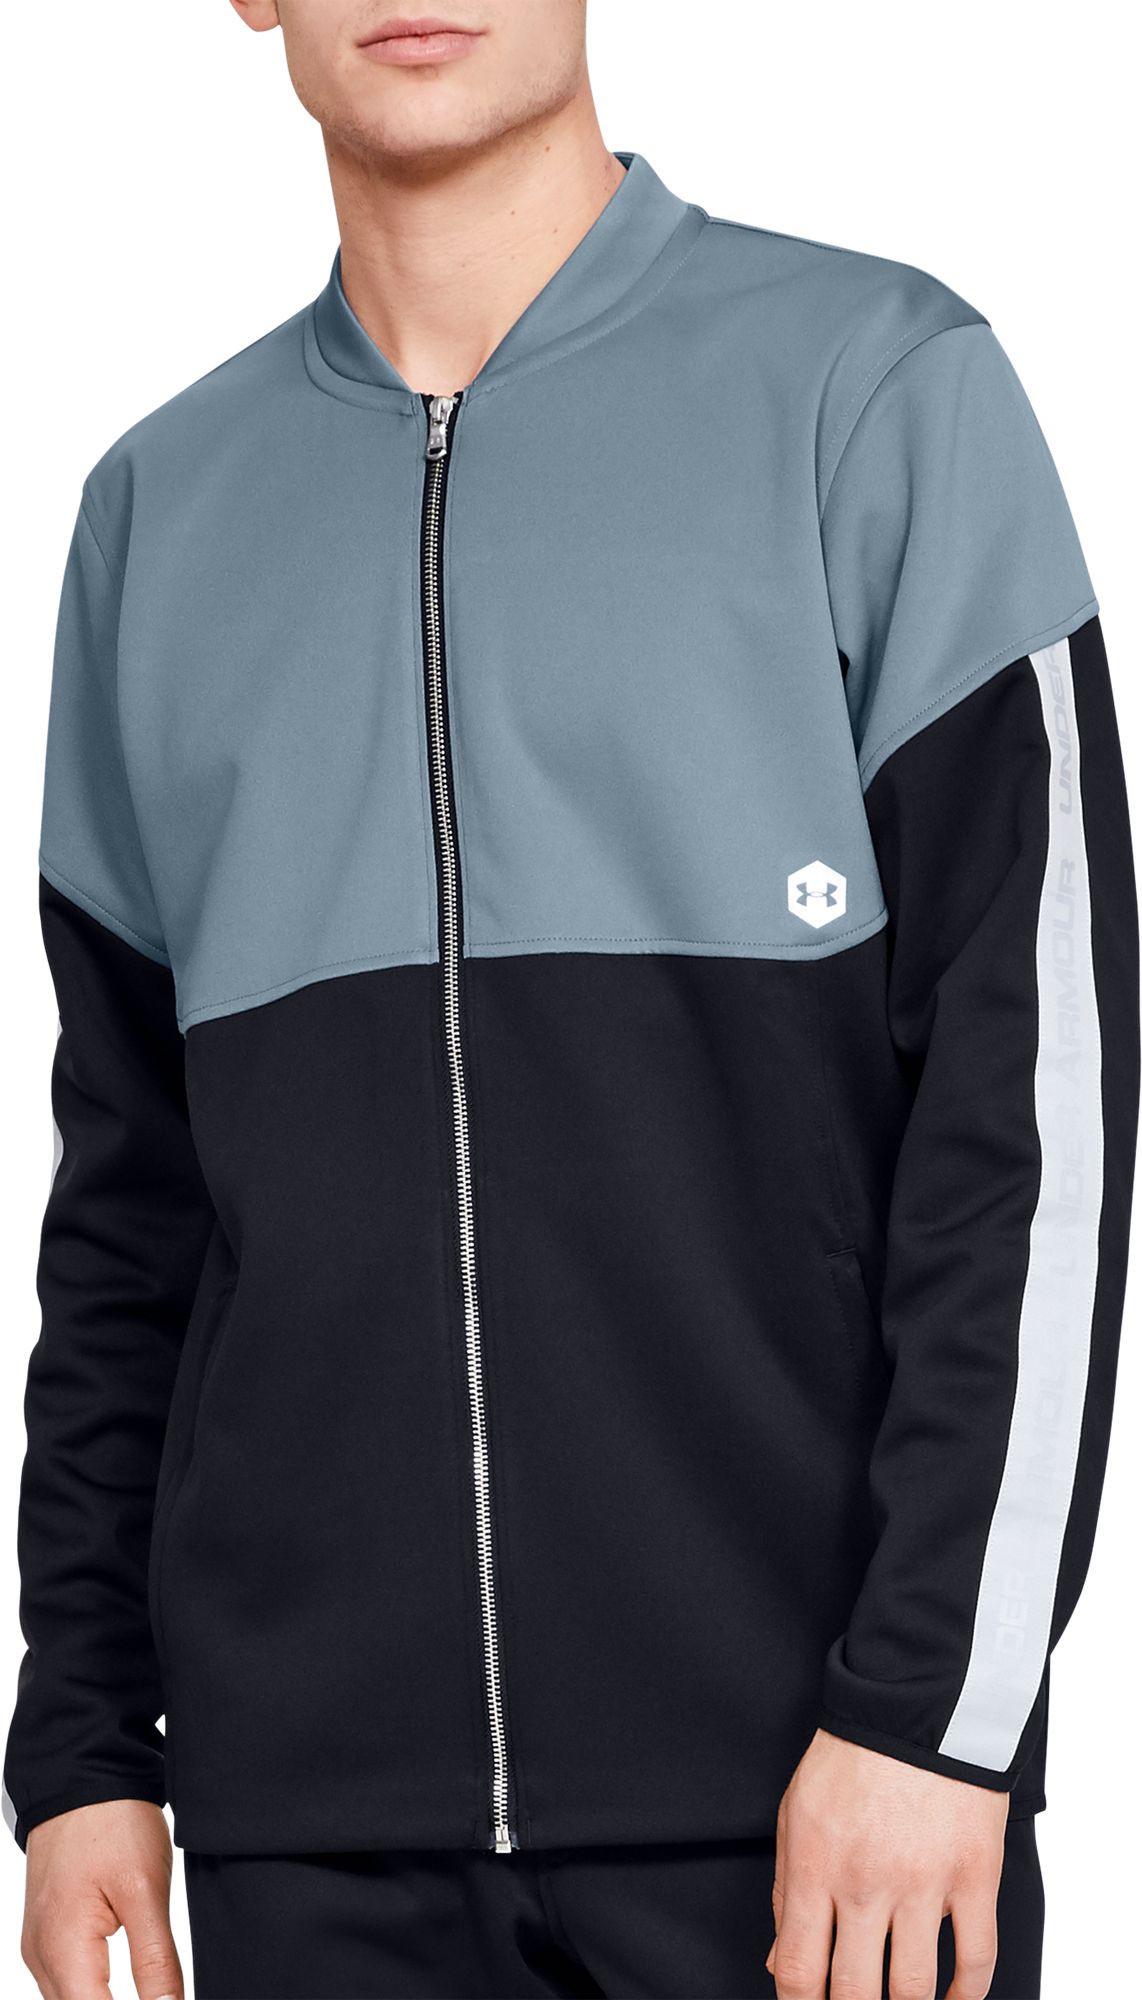 Athlete Recovery Knit Warm-Up Jacket 